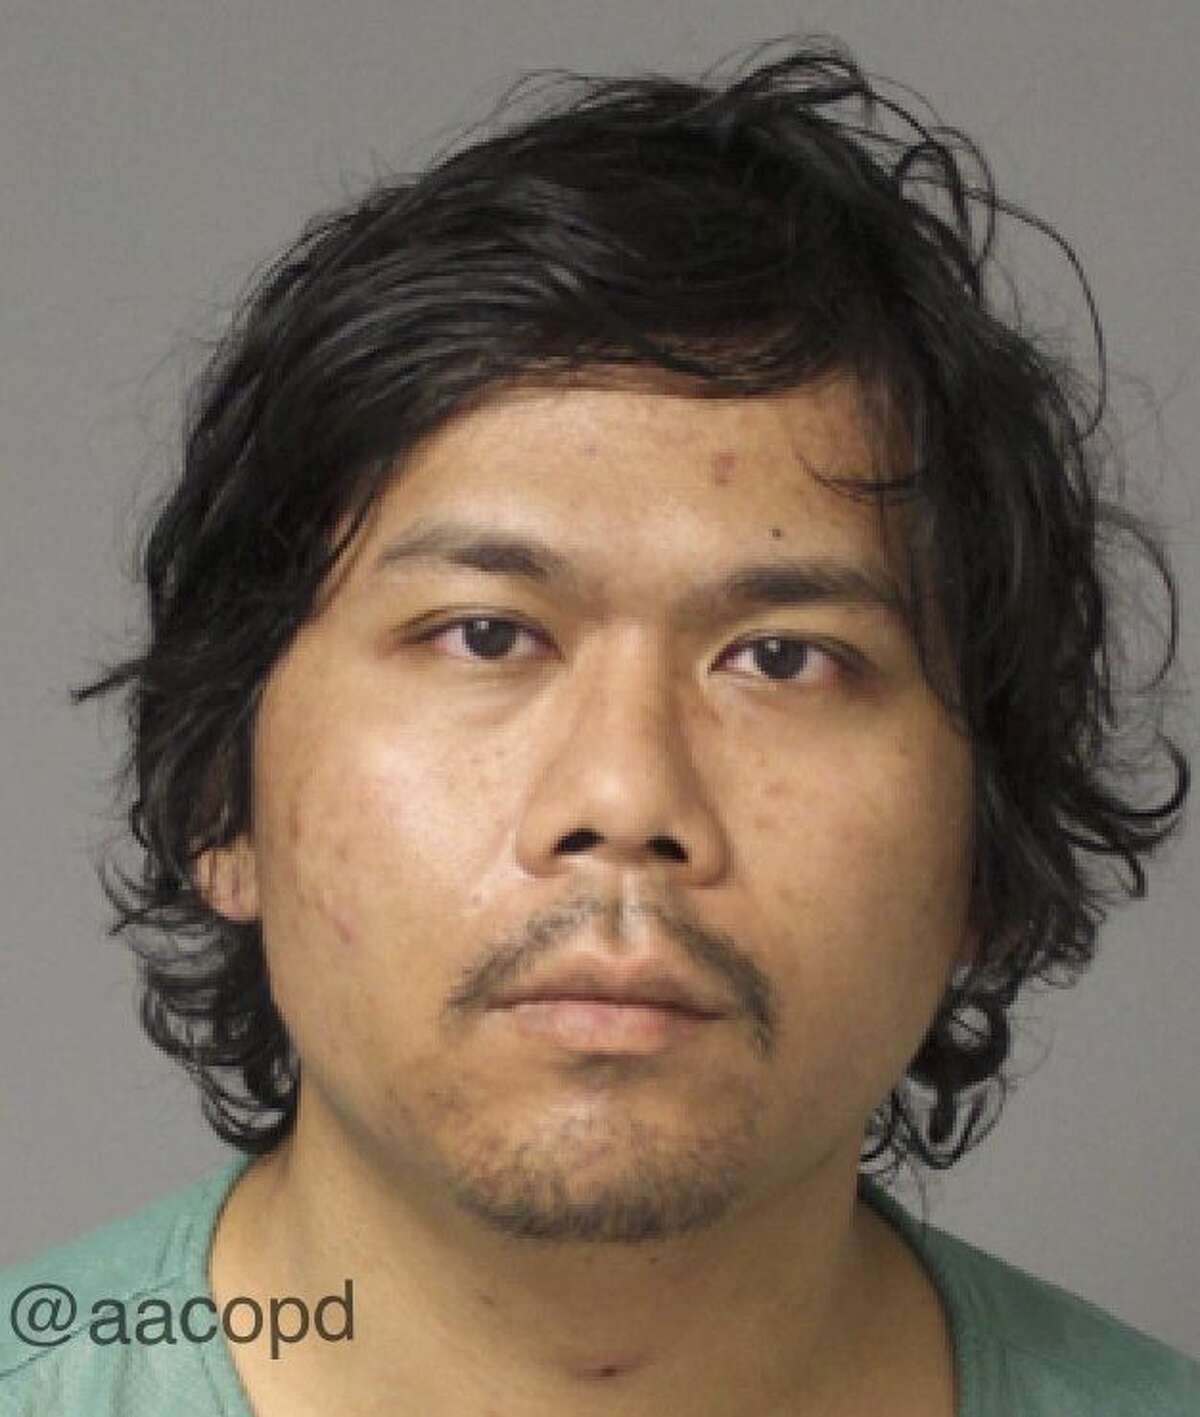 This undated image provided by the Anne Arundel County Police Department shows the booking photo of Hong Young. Young, accused of firing at five public places in Maryland, including a building at the National Security Agency, chose his targets at random, police said Wednesday, March 4, 2015. Young was charged with attempted murder and assault in the first shooting Feb. 24 near a mall. Police said the other shootings were linked by ballistic evidence or surveillance video. (AP Photo/Anne Arundel County Police Department)